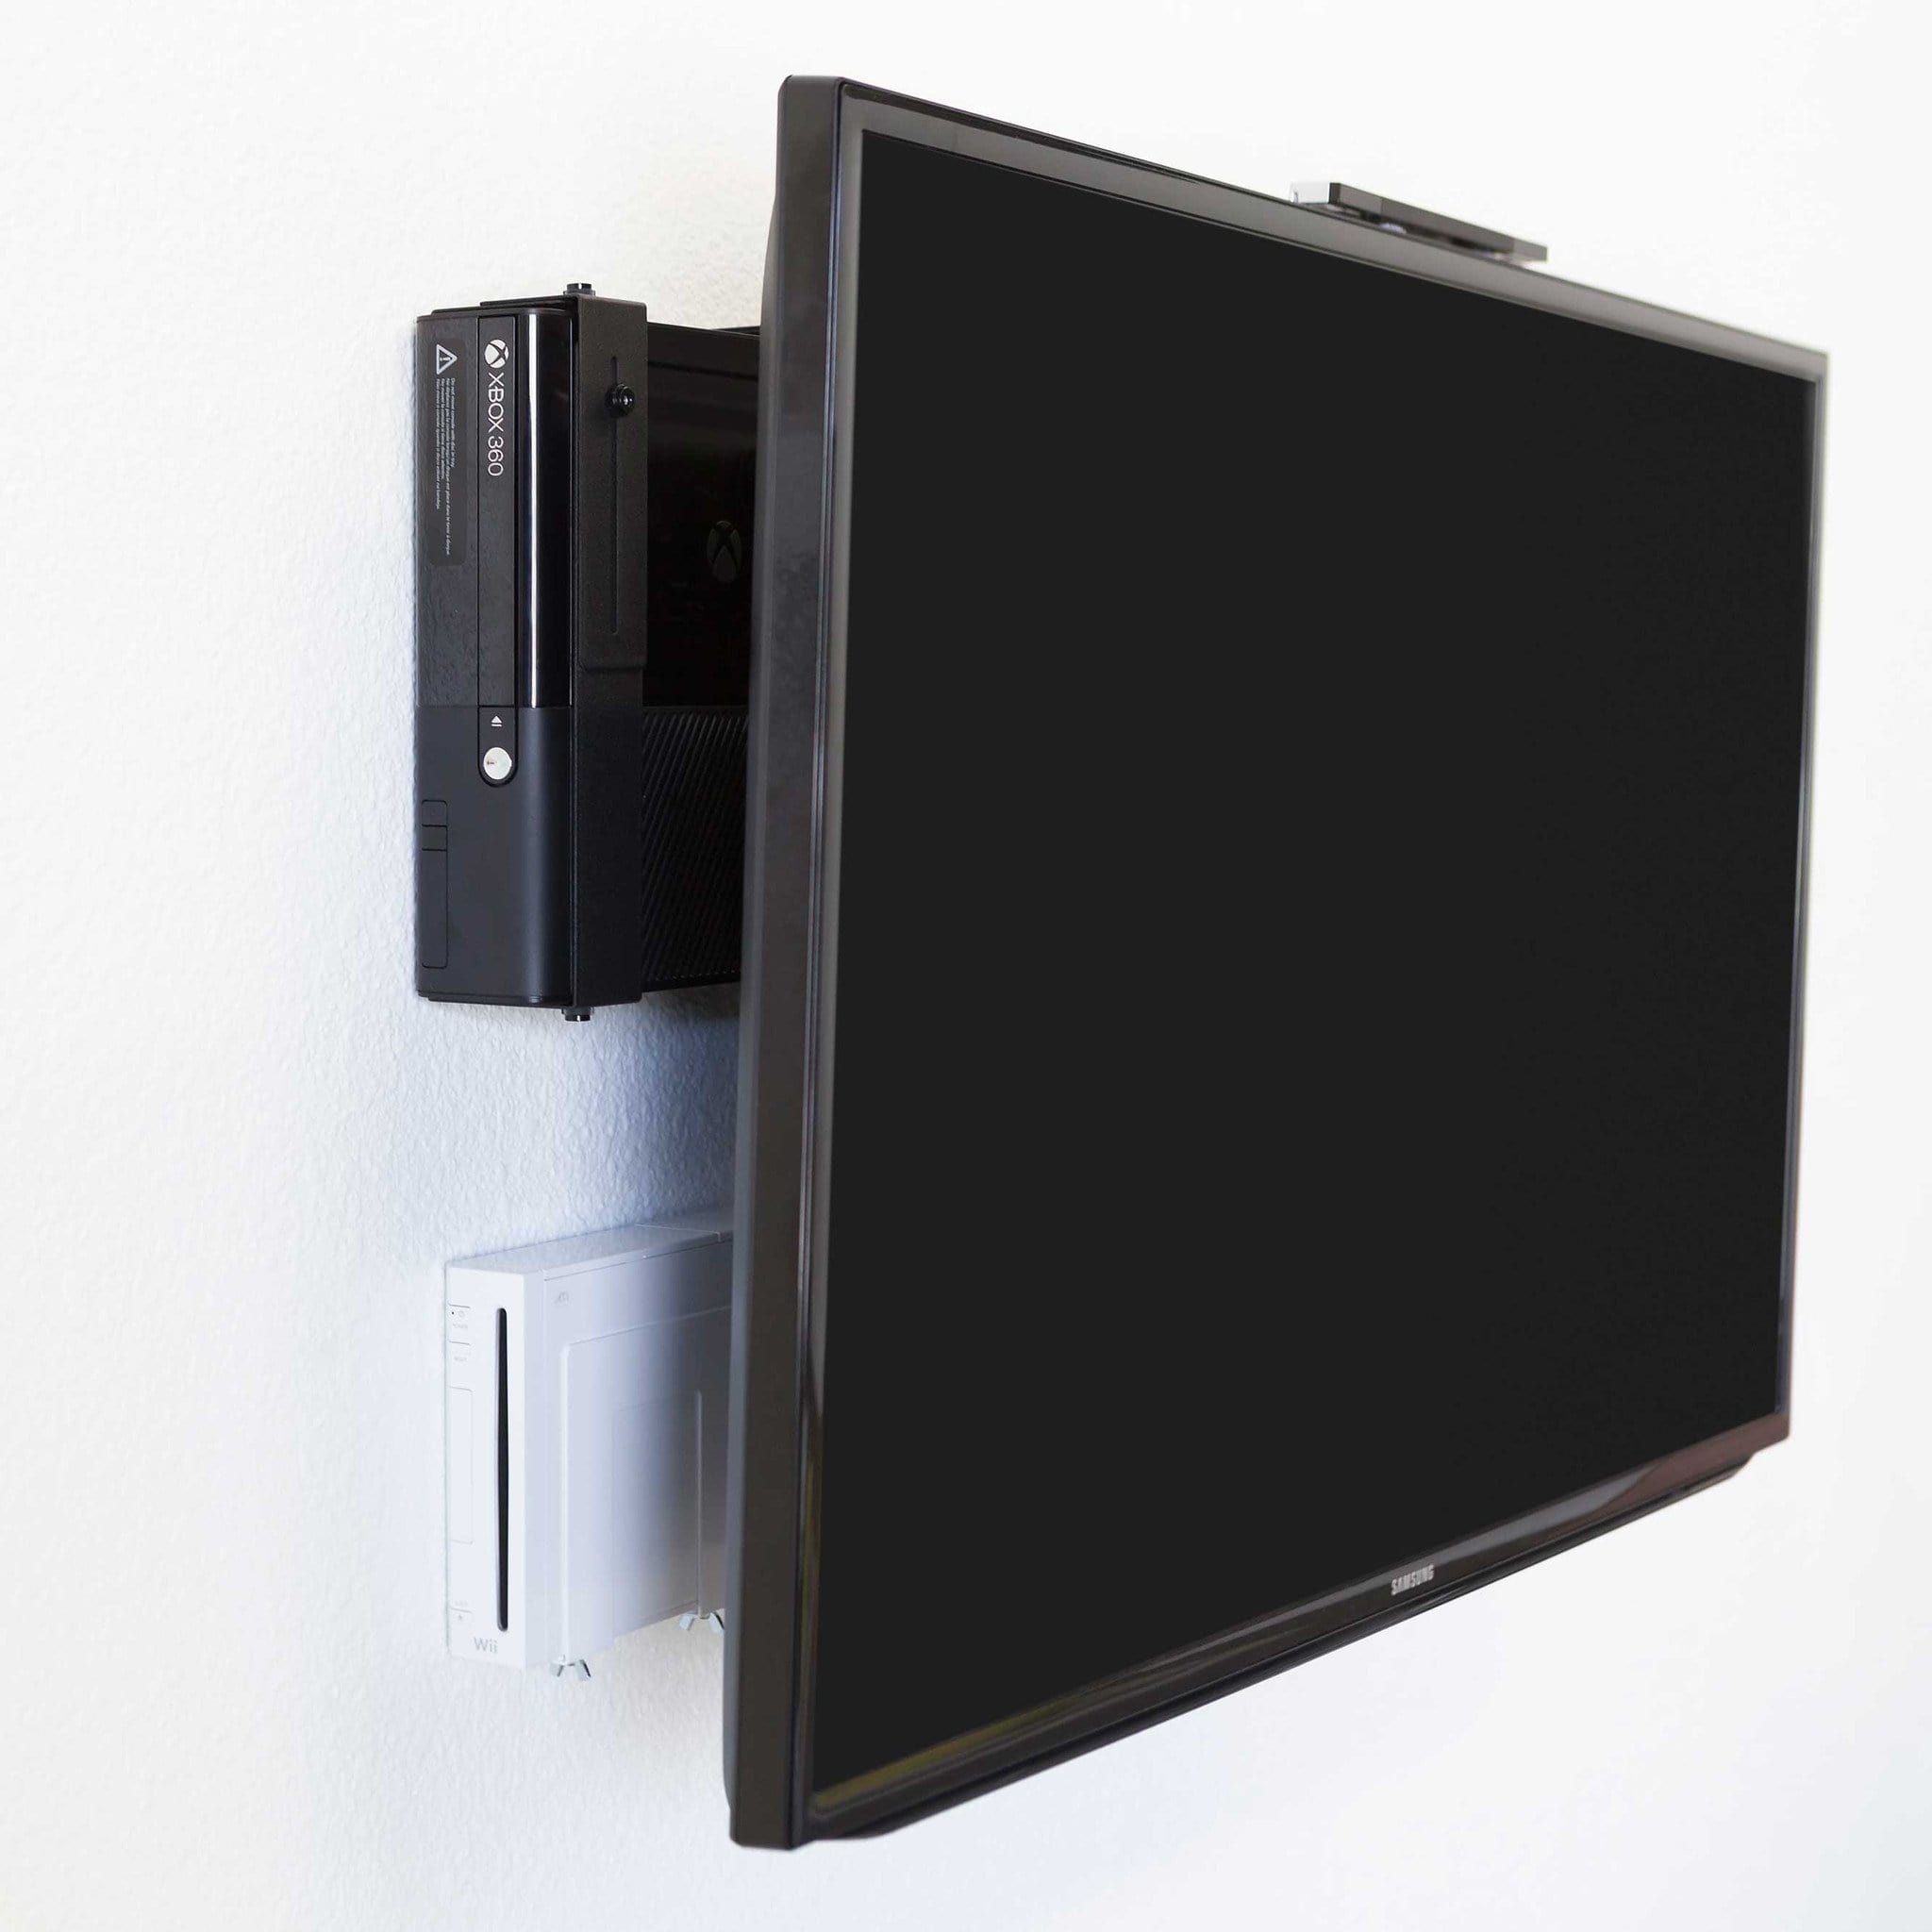 Side view TV Showing Wall Mounted Game Consoles Behind